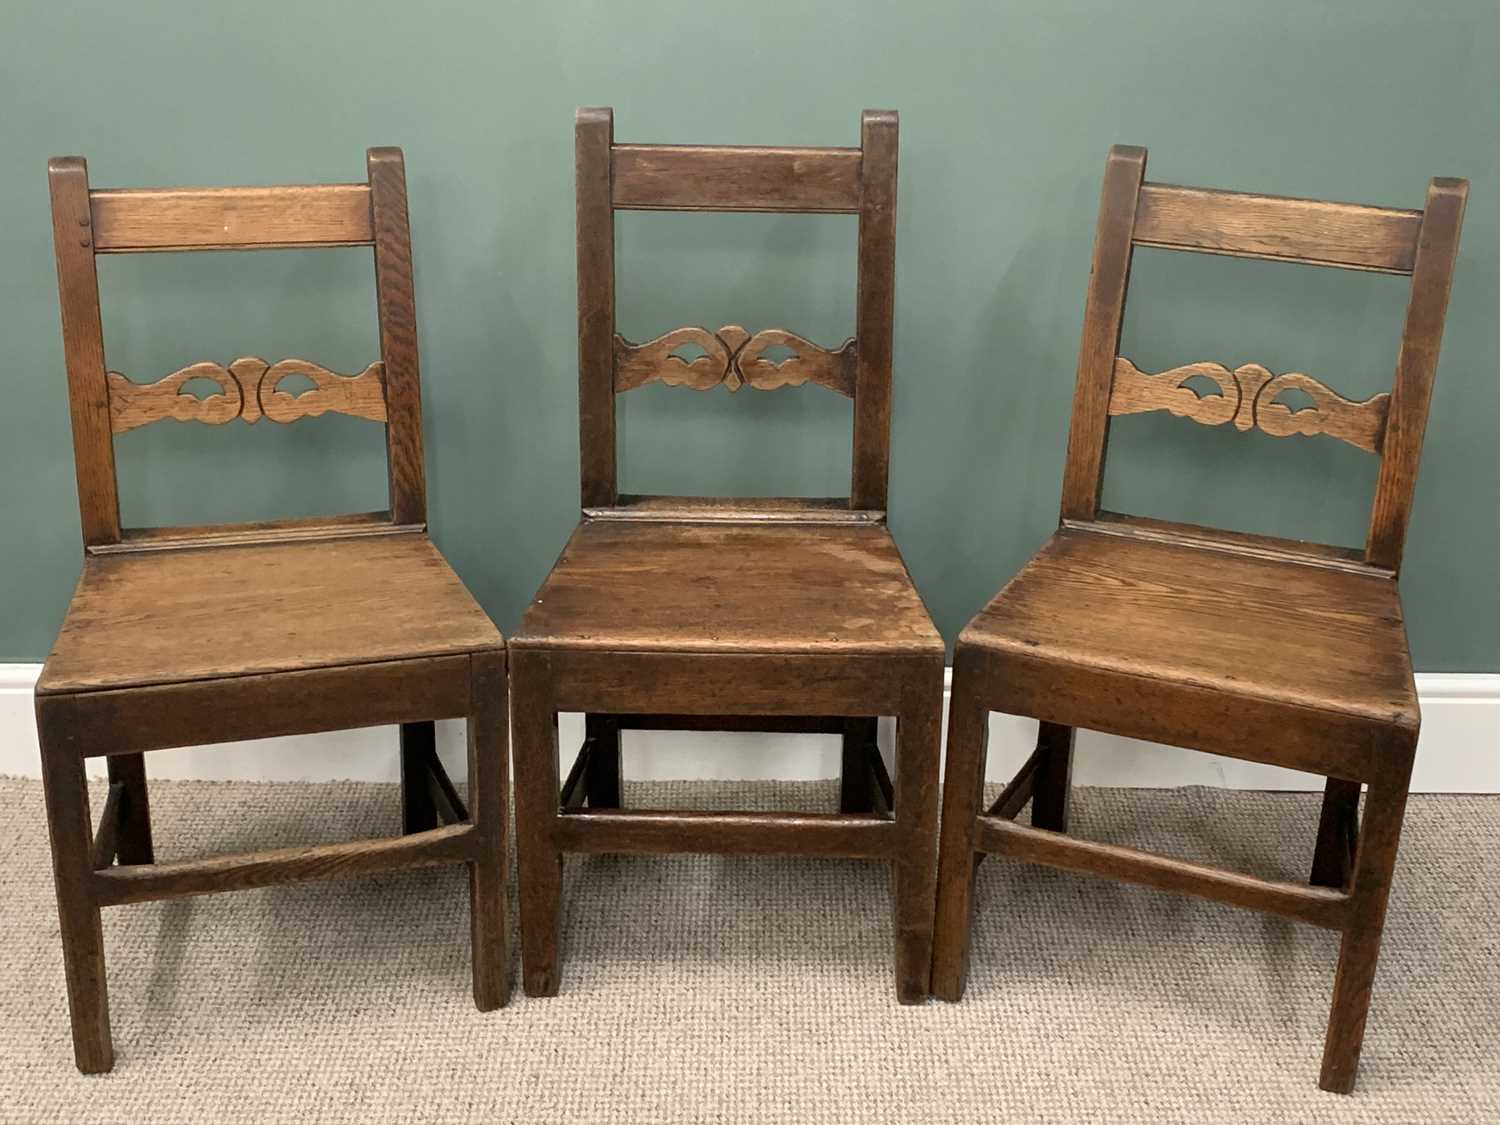 HARLEQUIN GROUP OF FIVE ANTIQUE OAK FARM HOUSE CHAIRS, peg joined construction, comprising pair with - Image 3 of 3